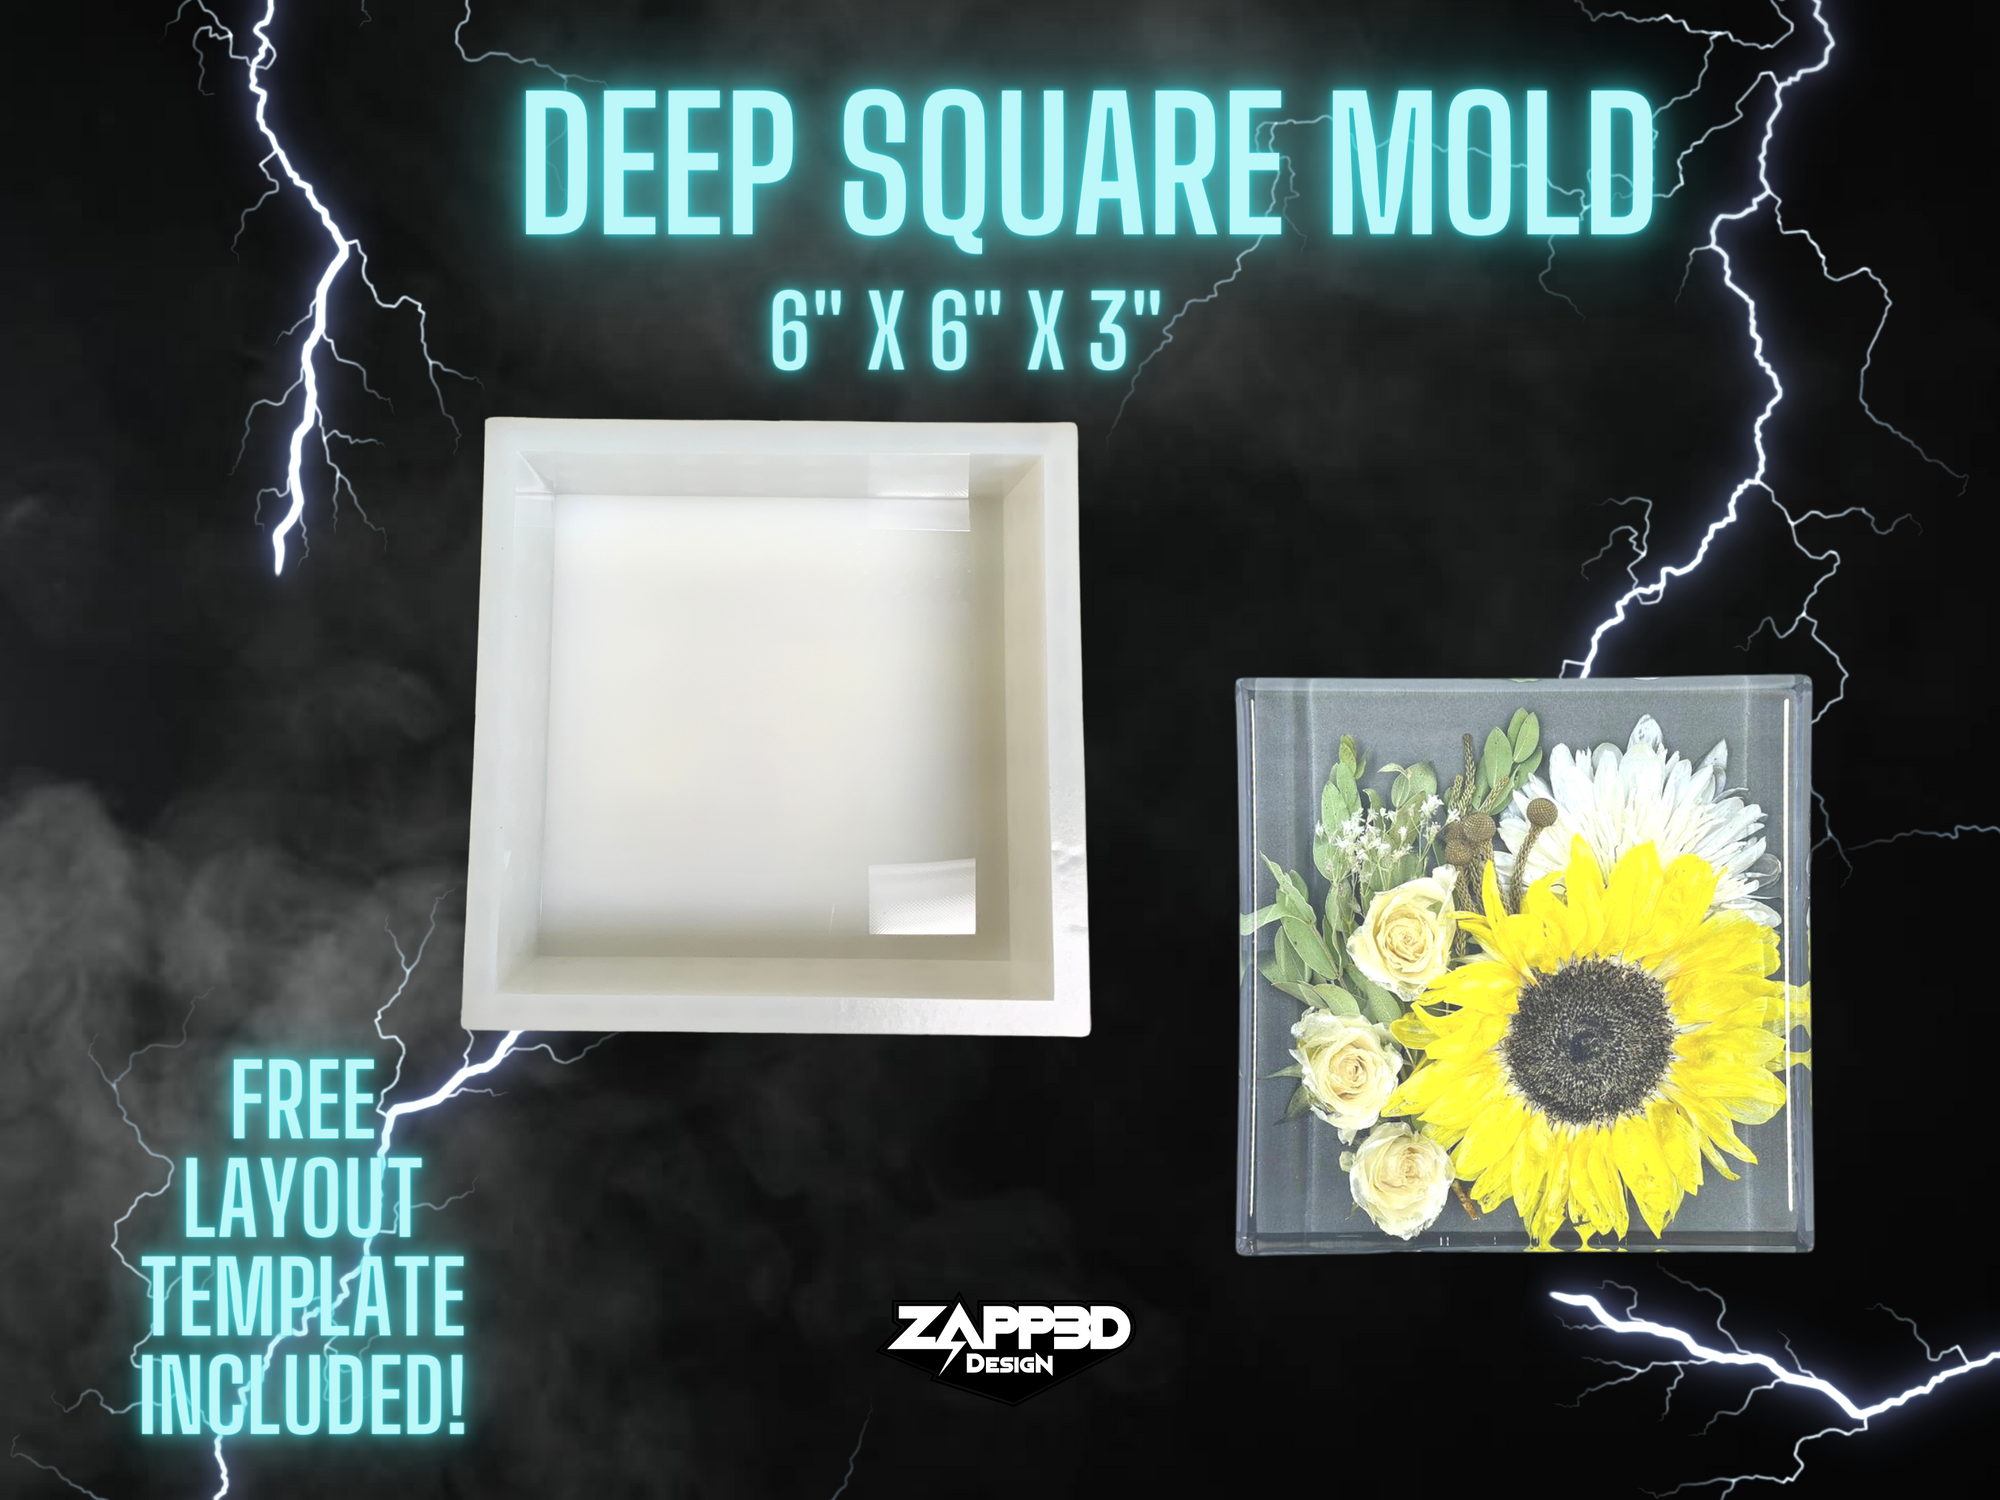 3 Deep Rectangle Block Mold // High Quality Silicone Mold for Resin // Mold  for Floral Preservation 